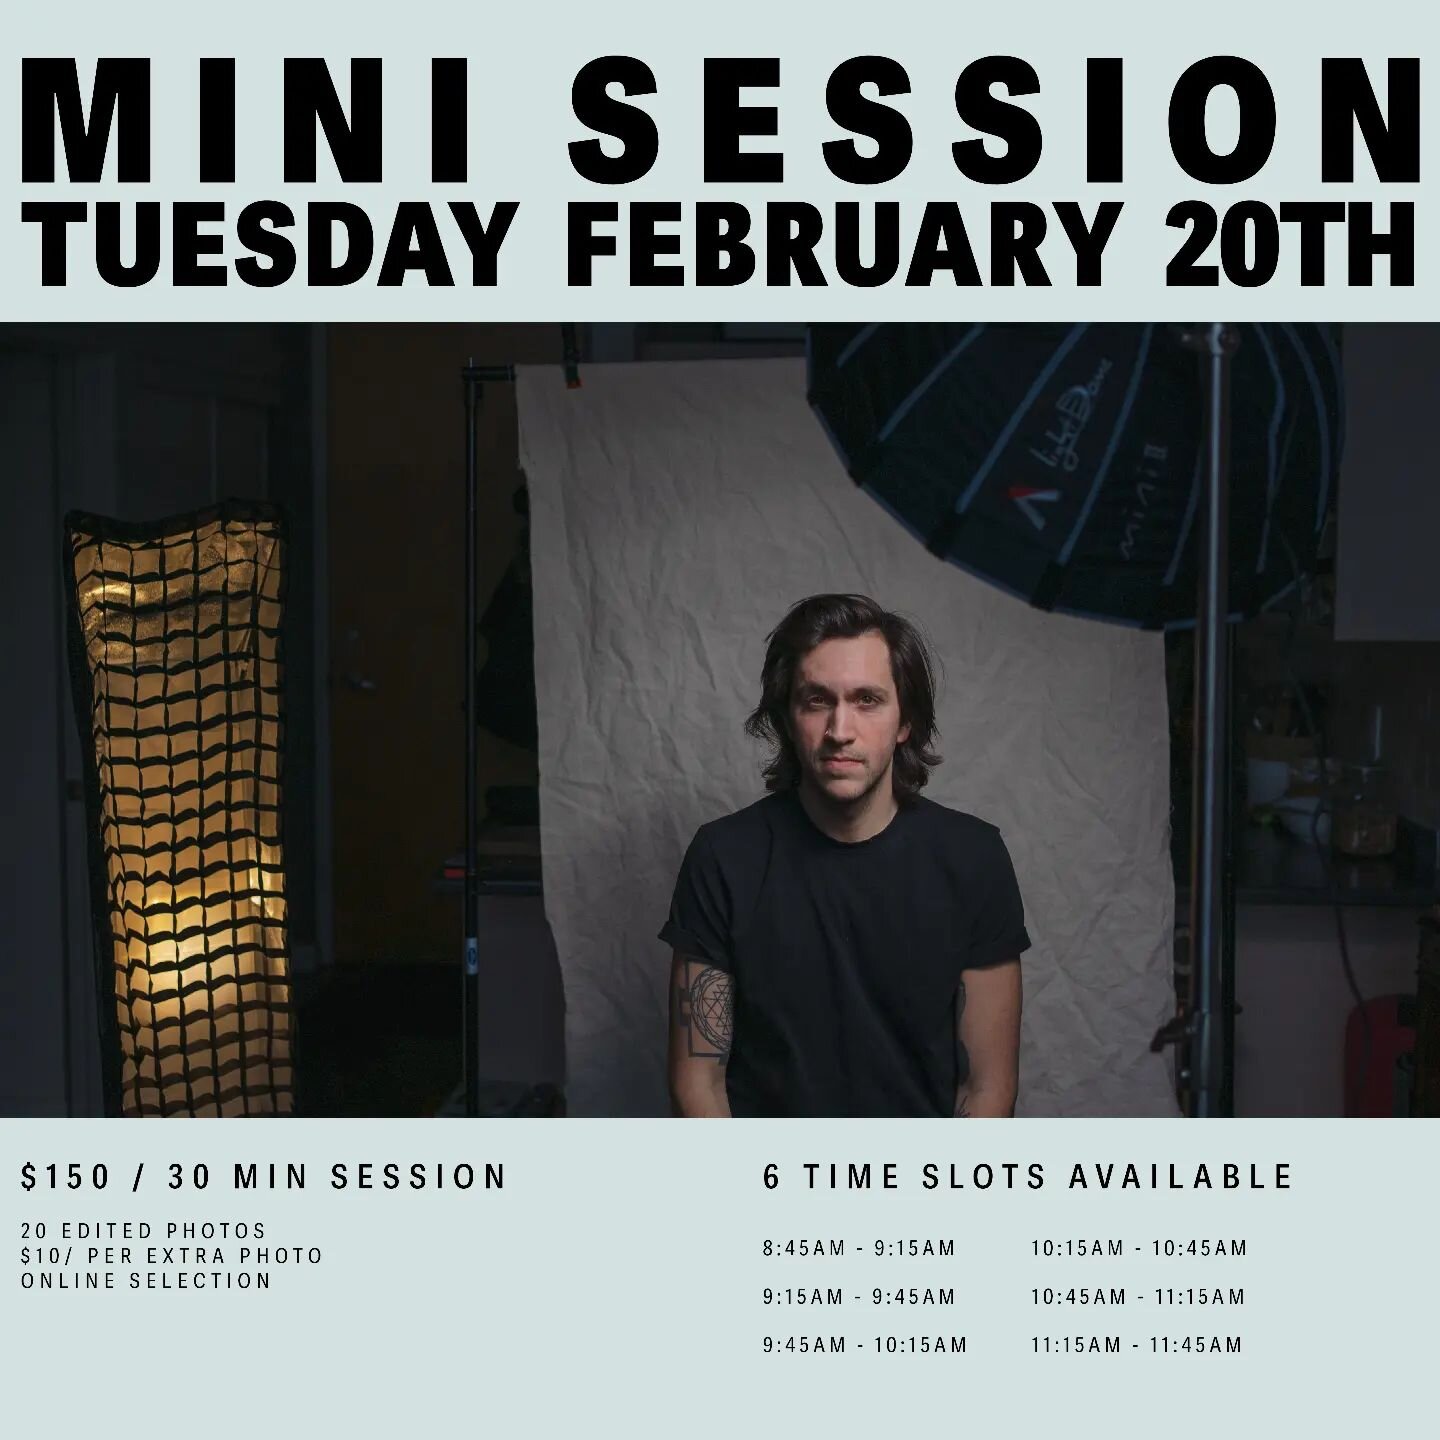 Y'all said yes to the mini sessions. So I booked a photography studio for a few hours on Tuesday, February 20th. There are 6 slots available, so book them before they fill up. 

Things we could do:
Funky portraits
Update your professional headshots (